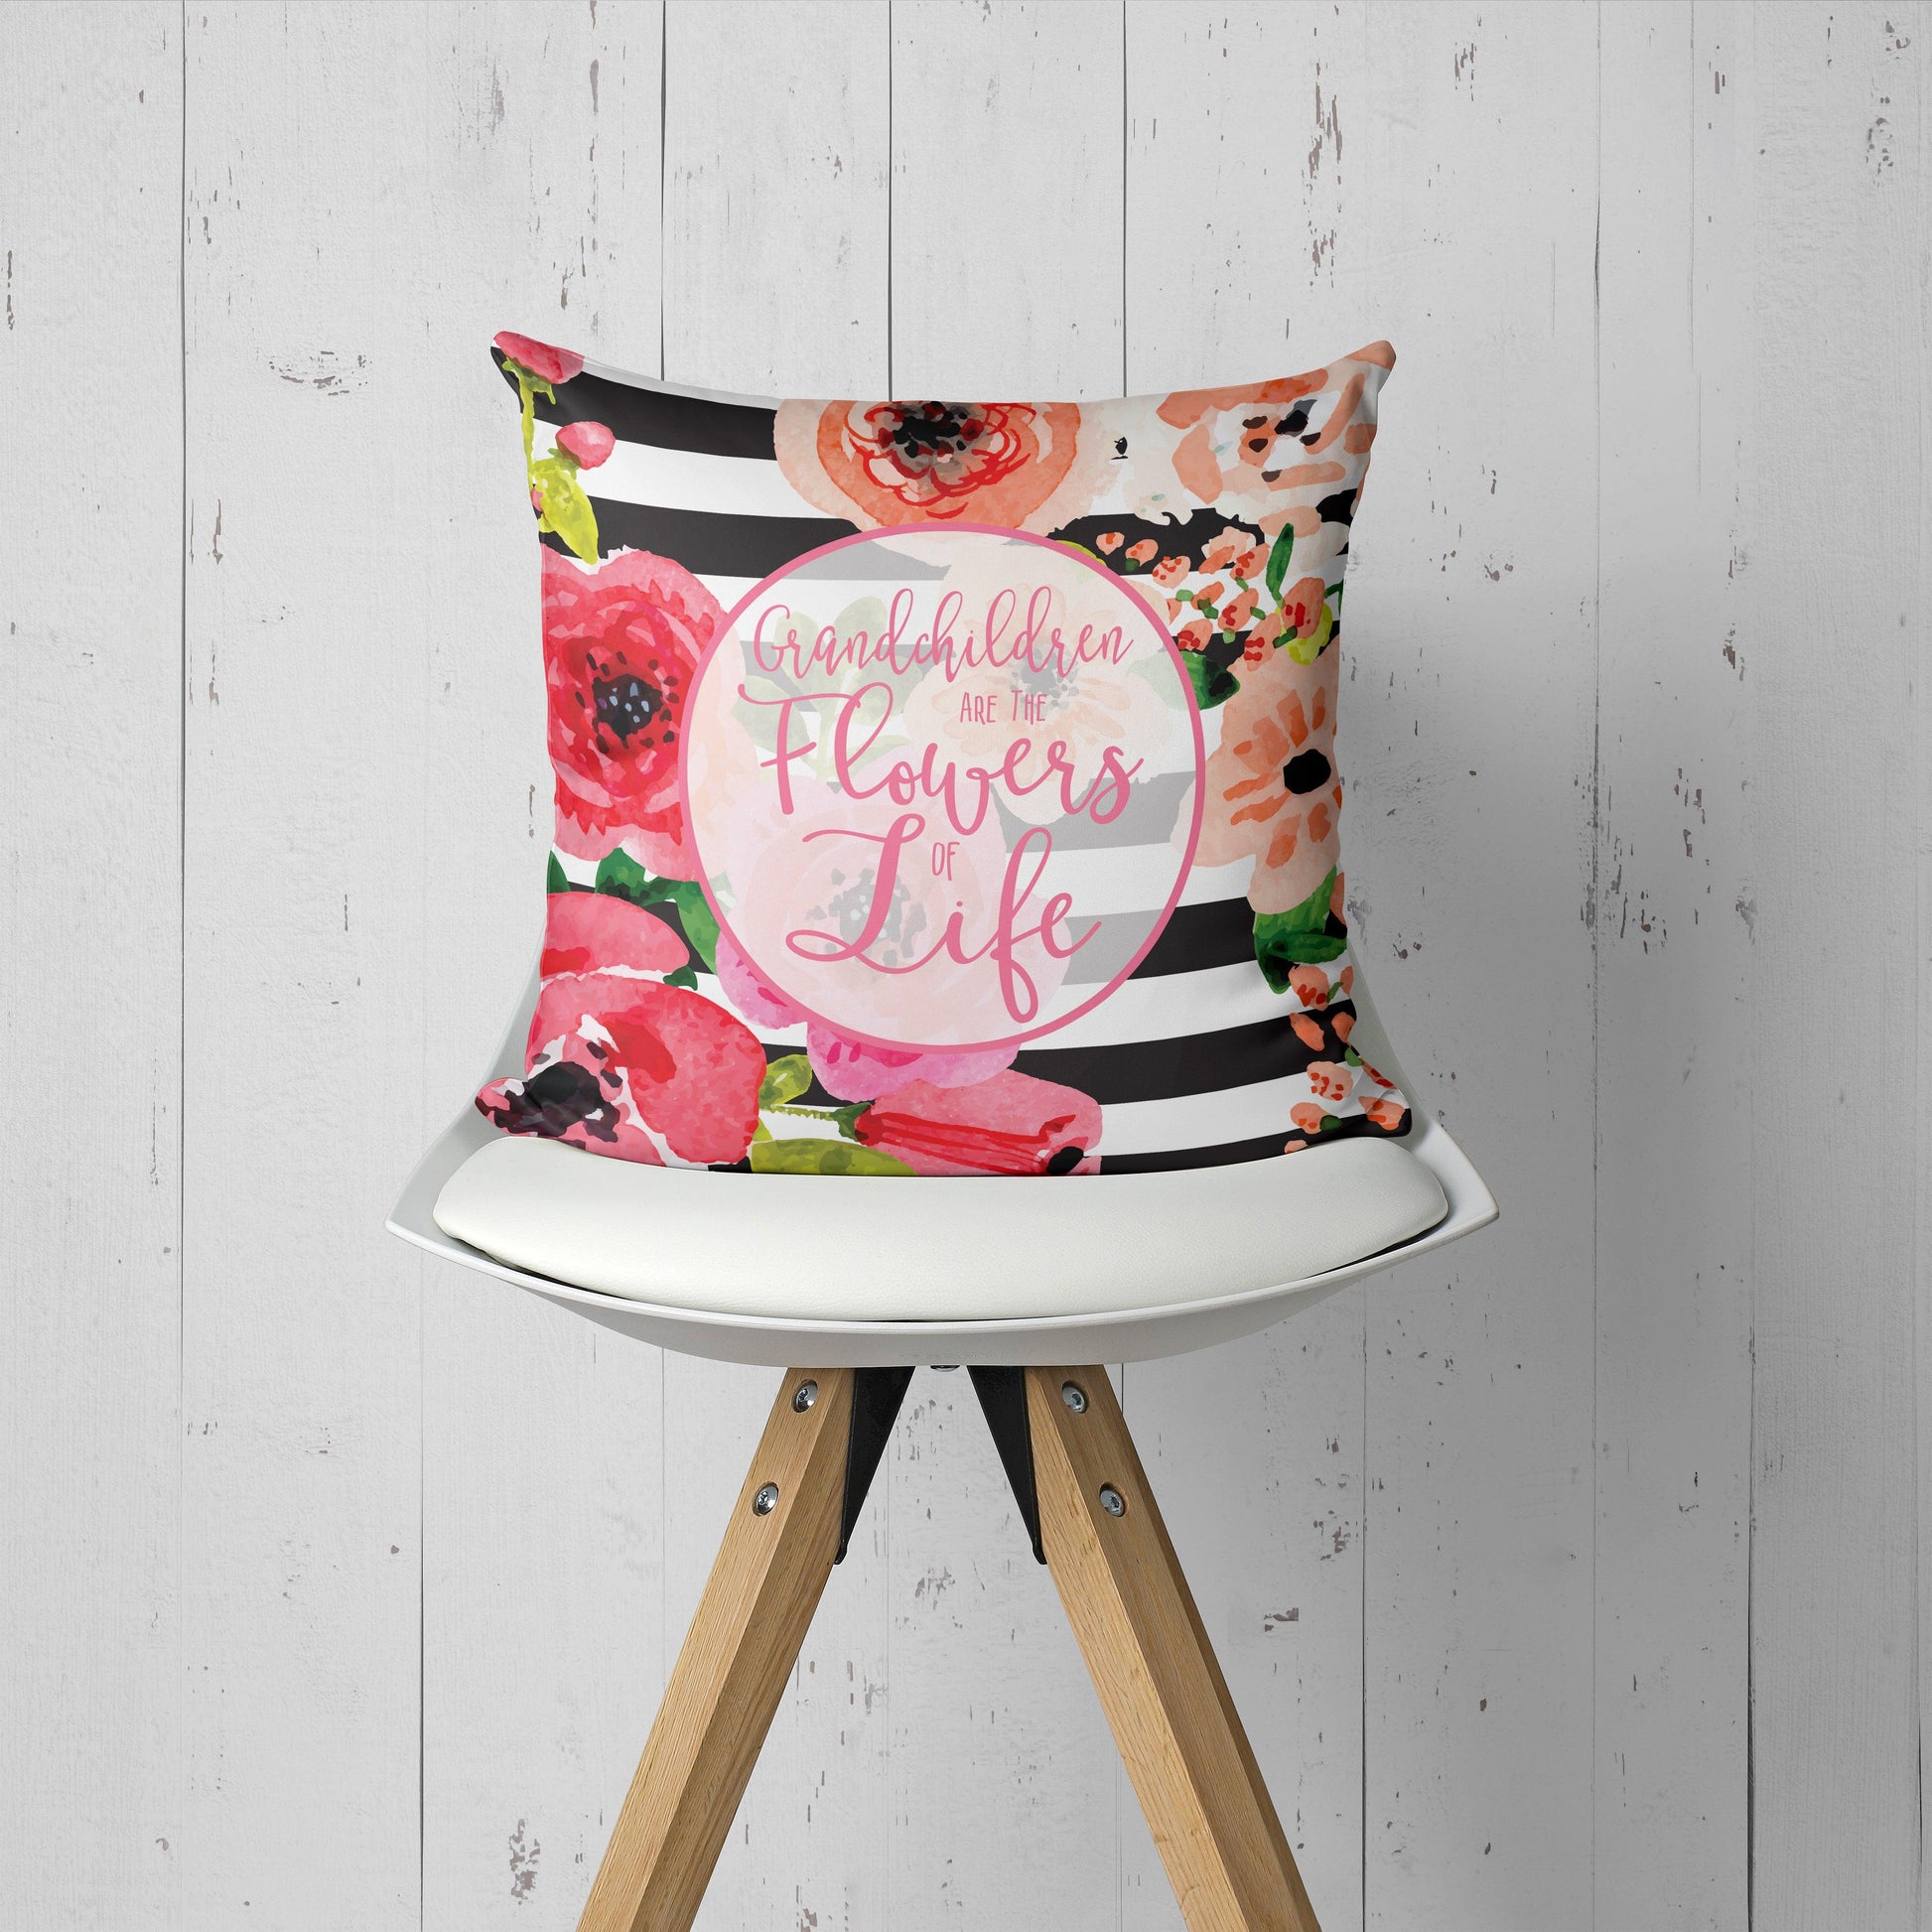 Grandchildren Are the Flowers of Life Pillow-Luxe Palette